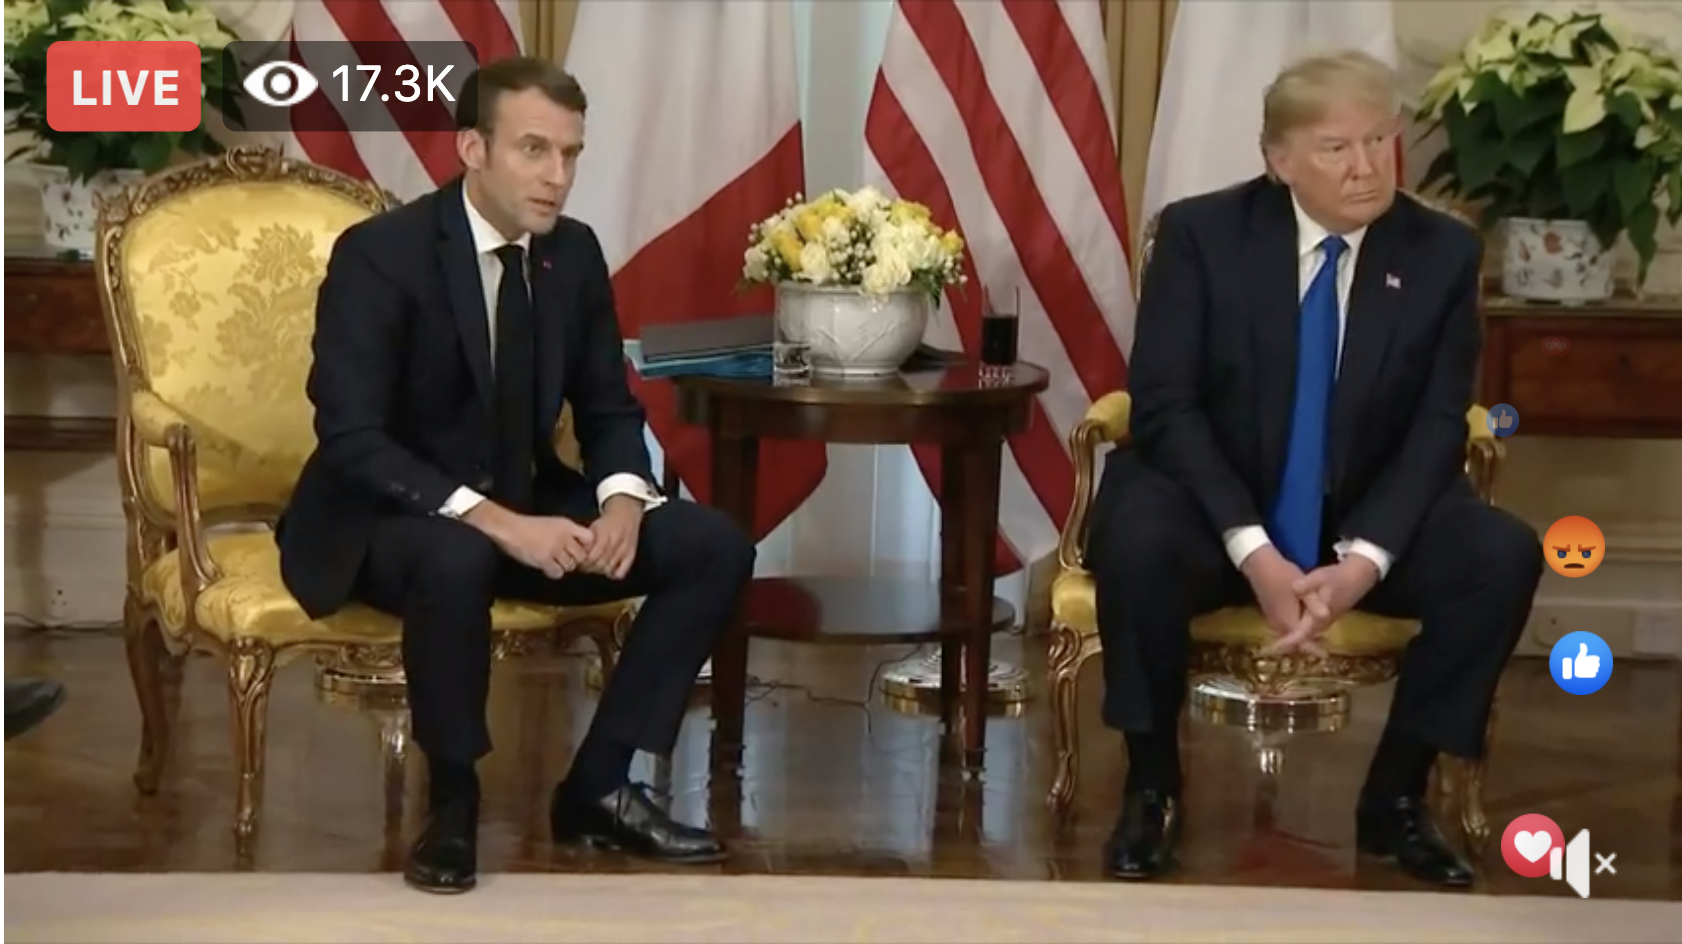 LIVE: President Donald J. Trump meets with French President Emmanuel Macron.